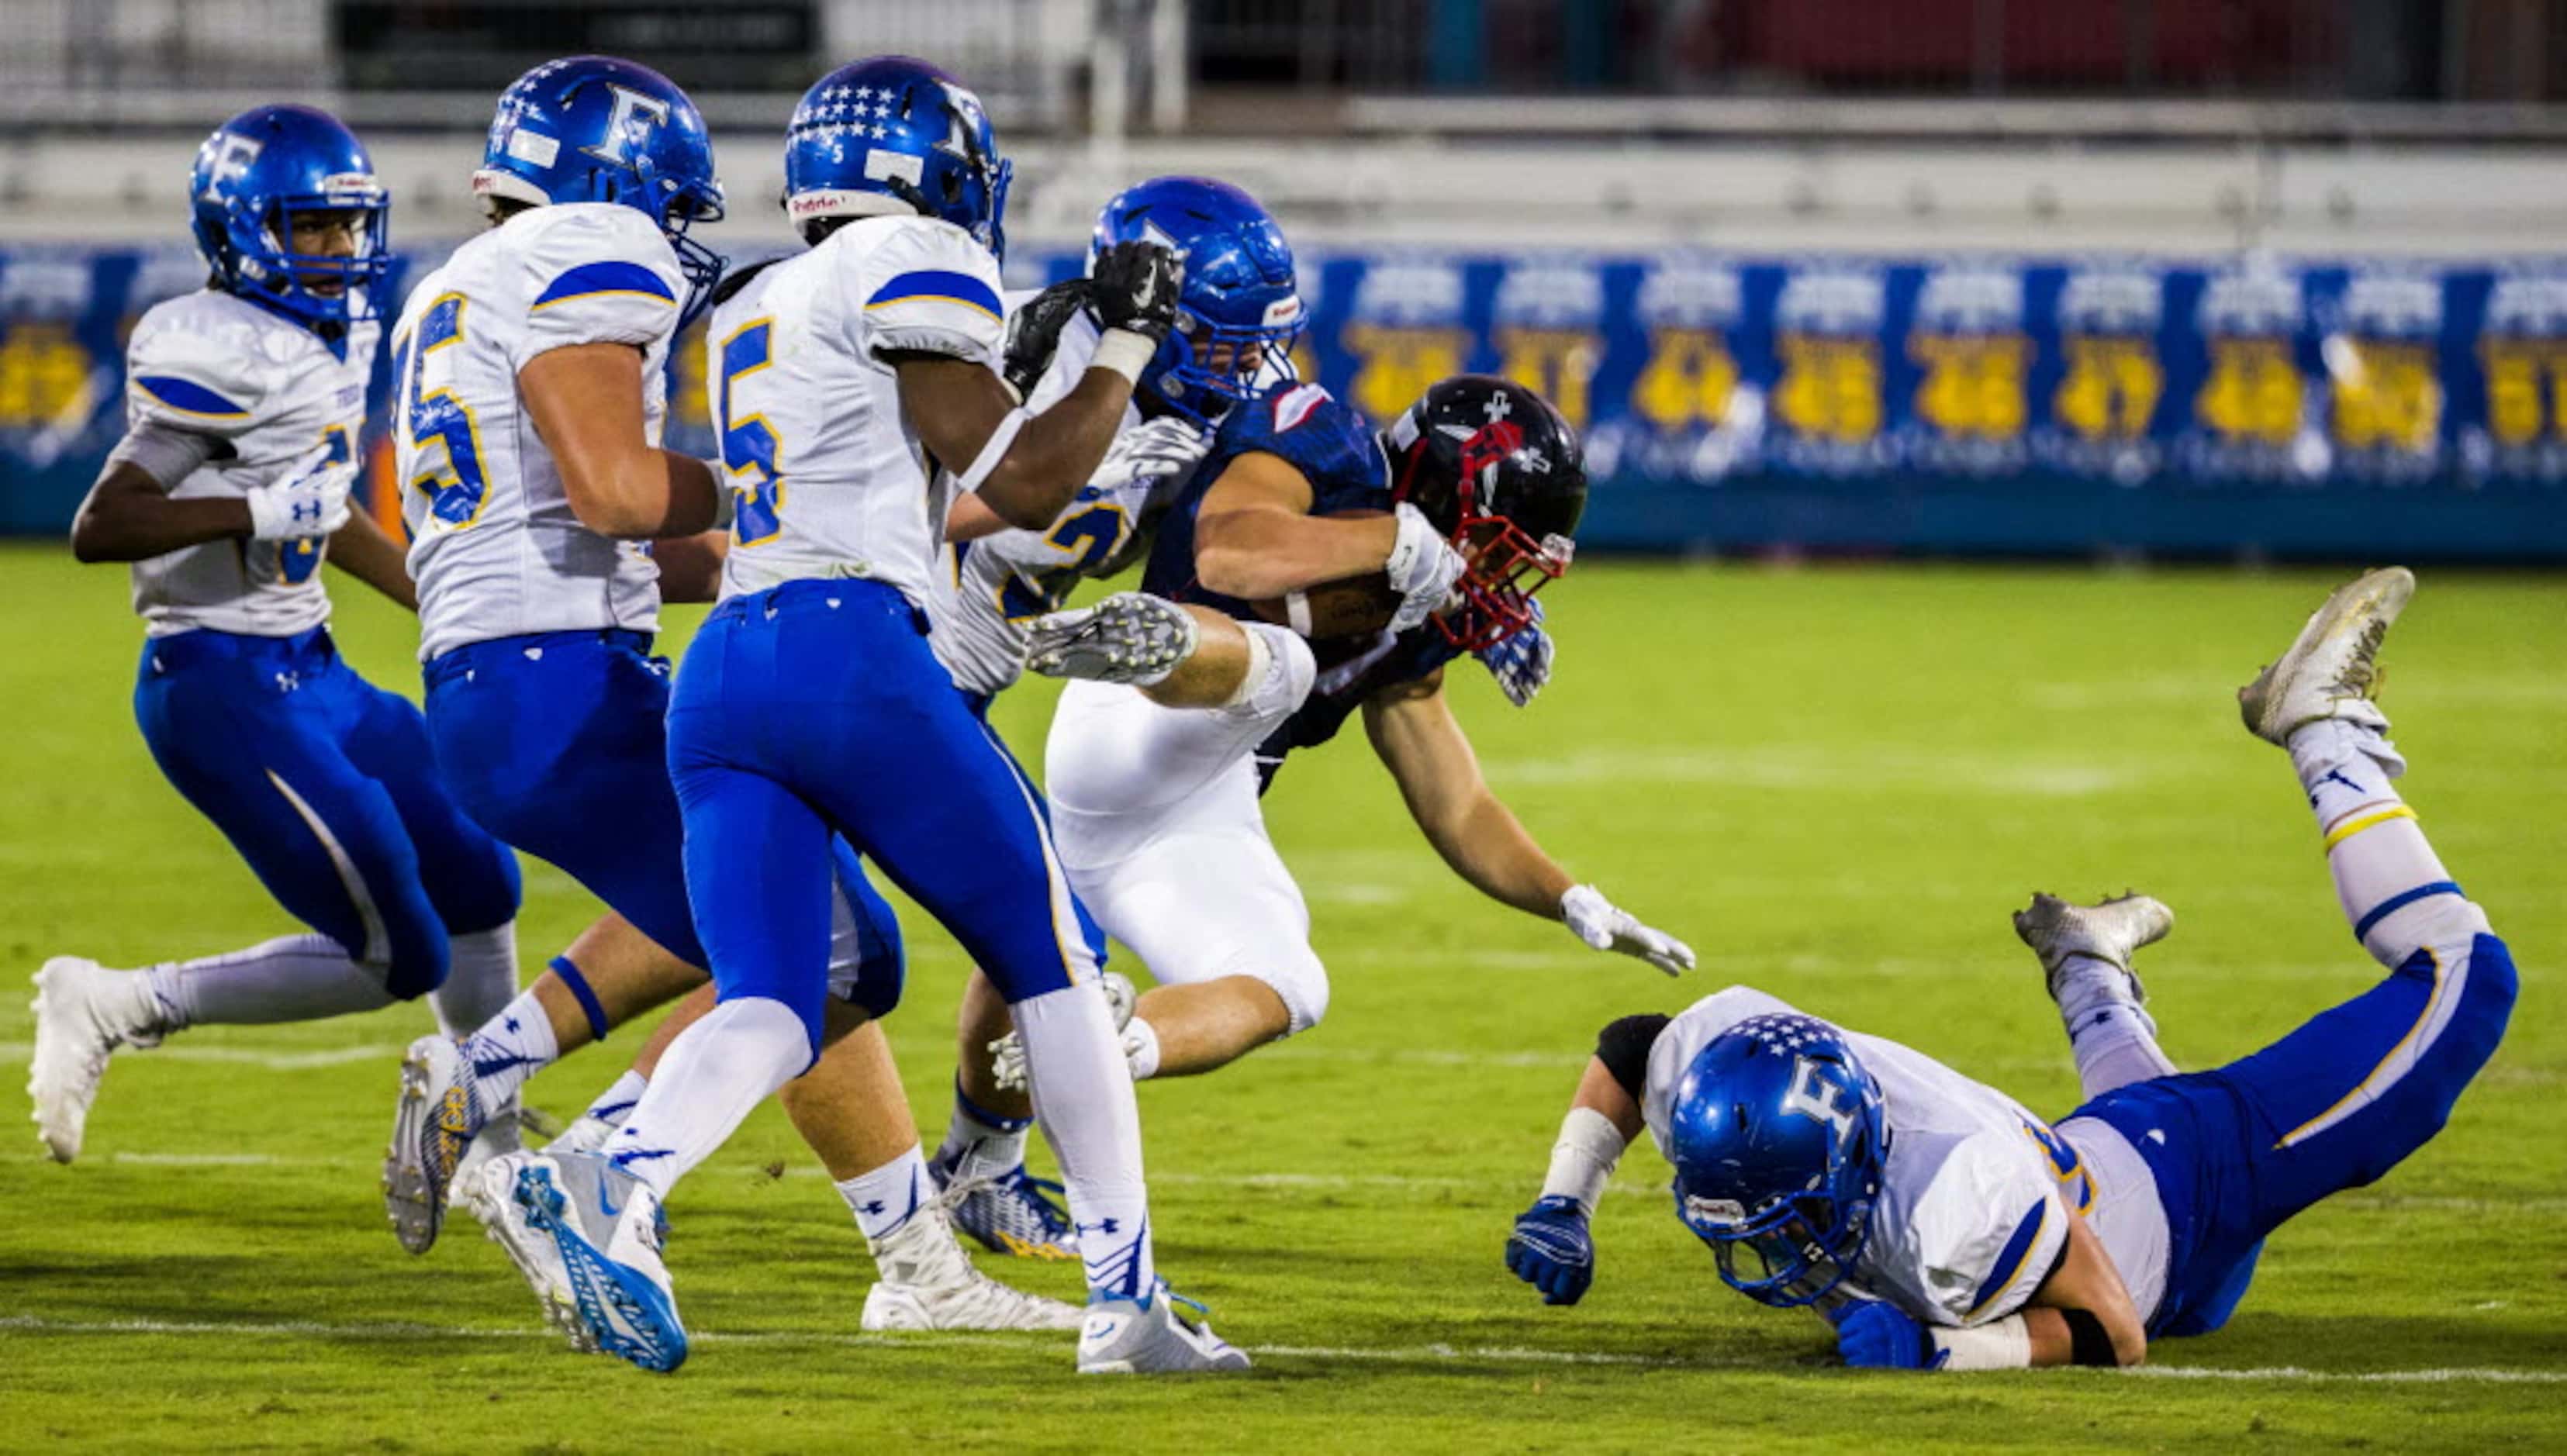 Frisco Centennial defensive back Brock Hawkins (7) is tackled by a group of Frisco offensive...